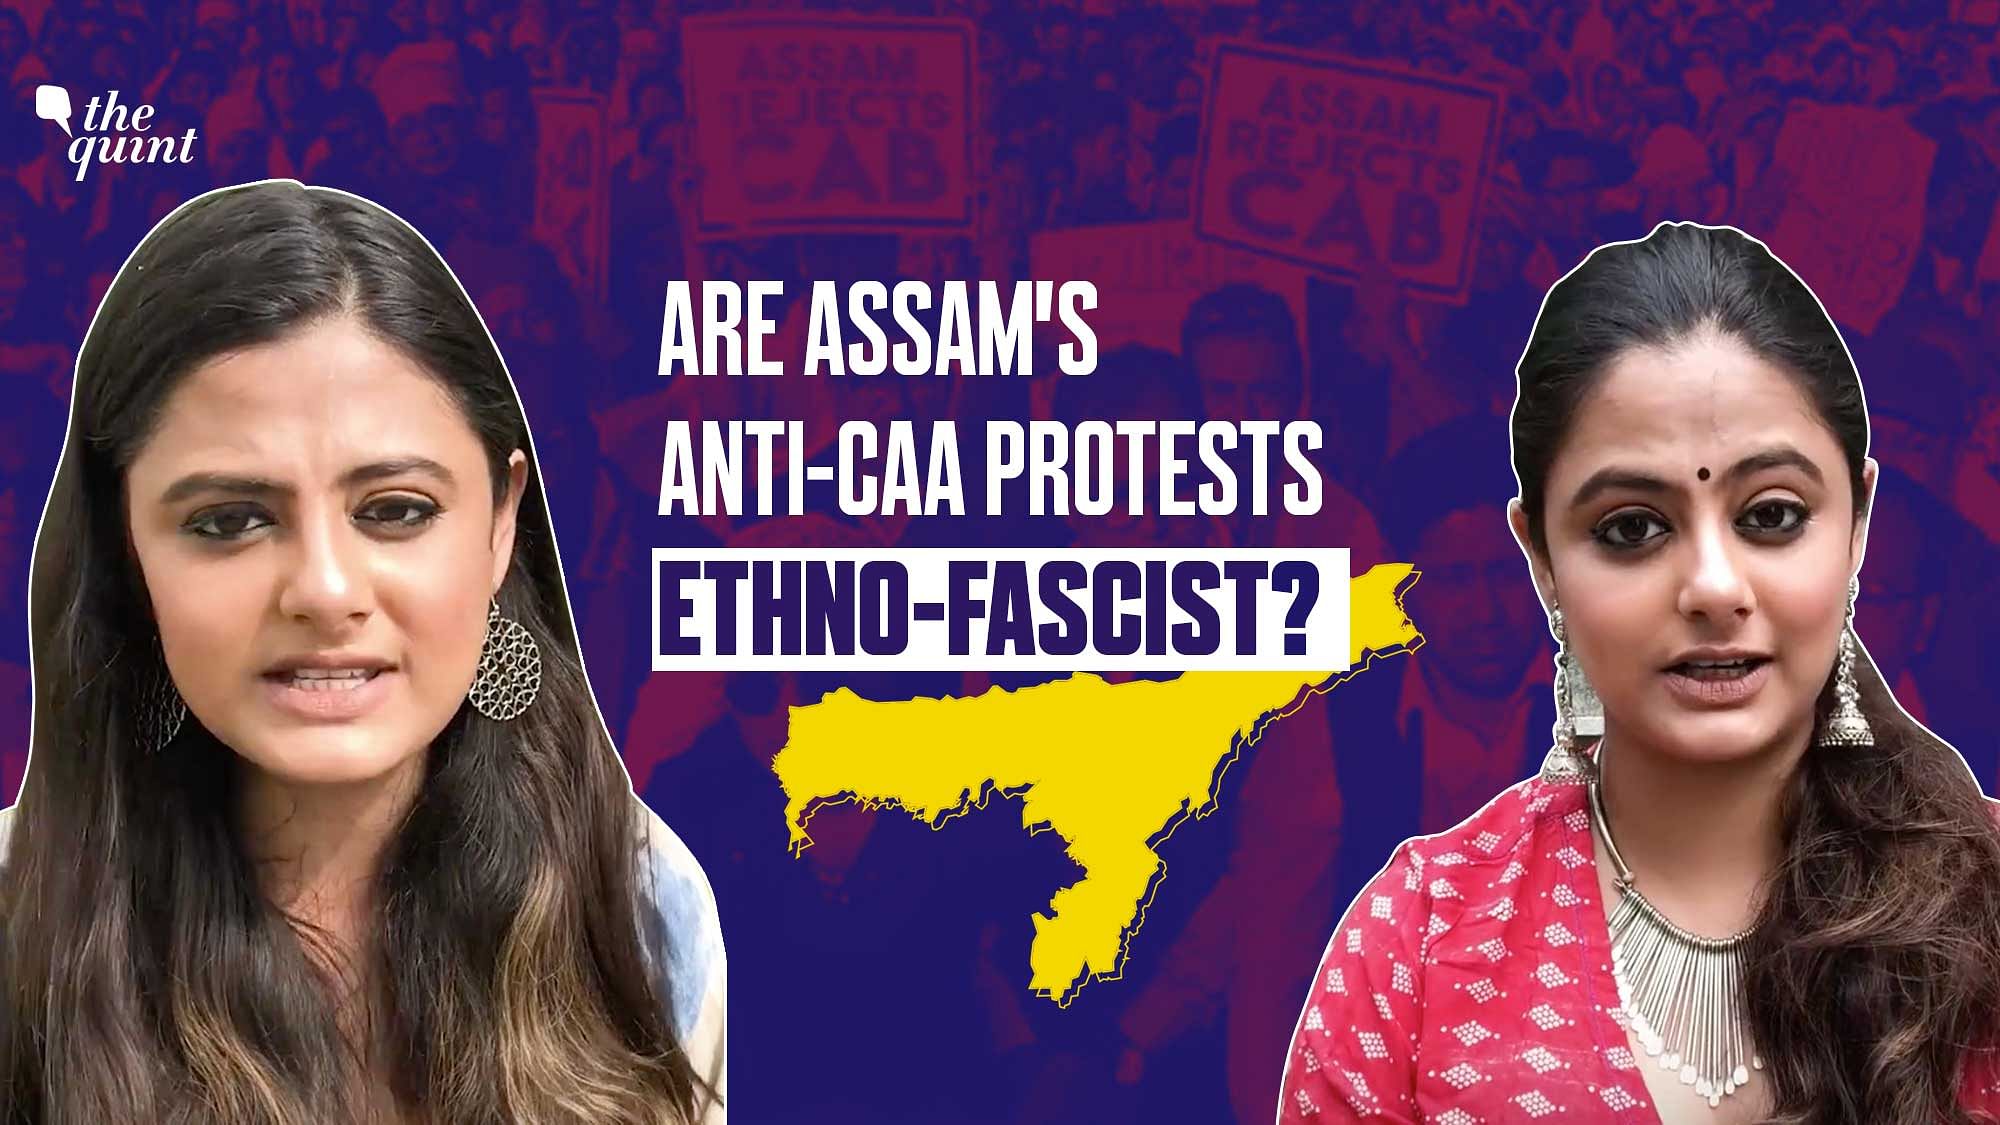 Assam was among the states that were at the forefront of protests against the Citizenship Amendment Bill (CAB) in 2019. Now that the Bill has become an Act, protests still continue 
unabated across the state. However, over time, many have accused anti-CAA protests in Assam of trying maintain an ethnic Assamese majority over the state's Bengali-speaking population. The Assamese, on the other hand, have defended the protests calling it protection of identity. So, which one is it? The Quint debates.